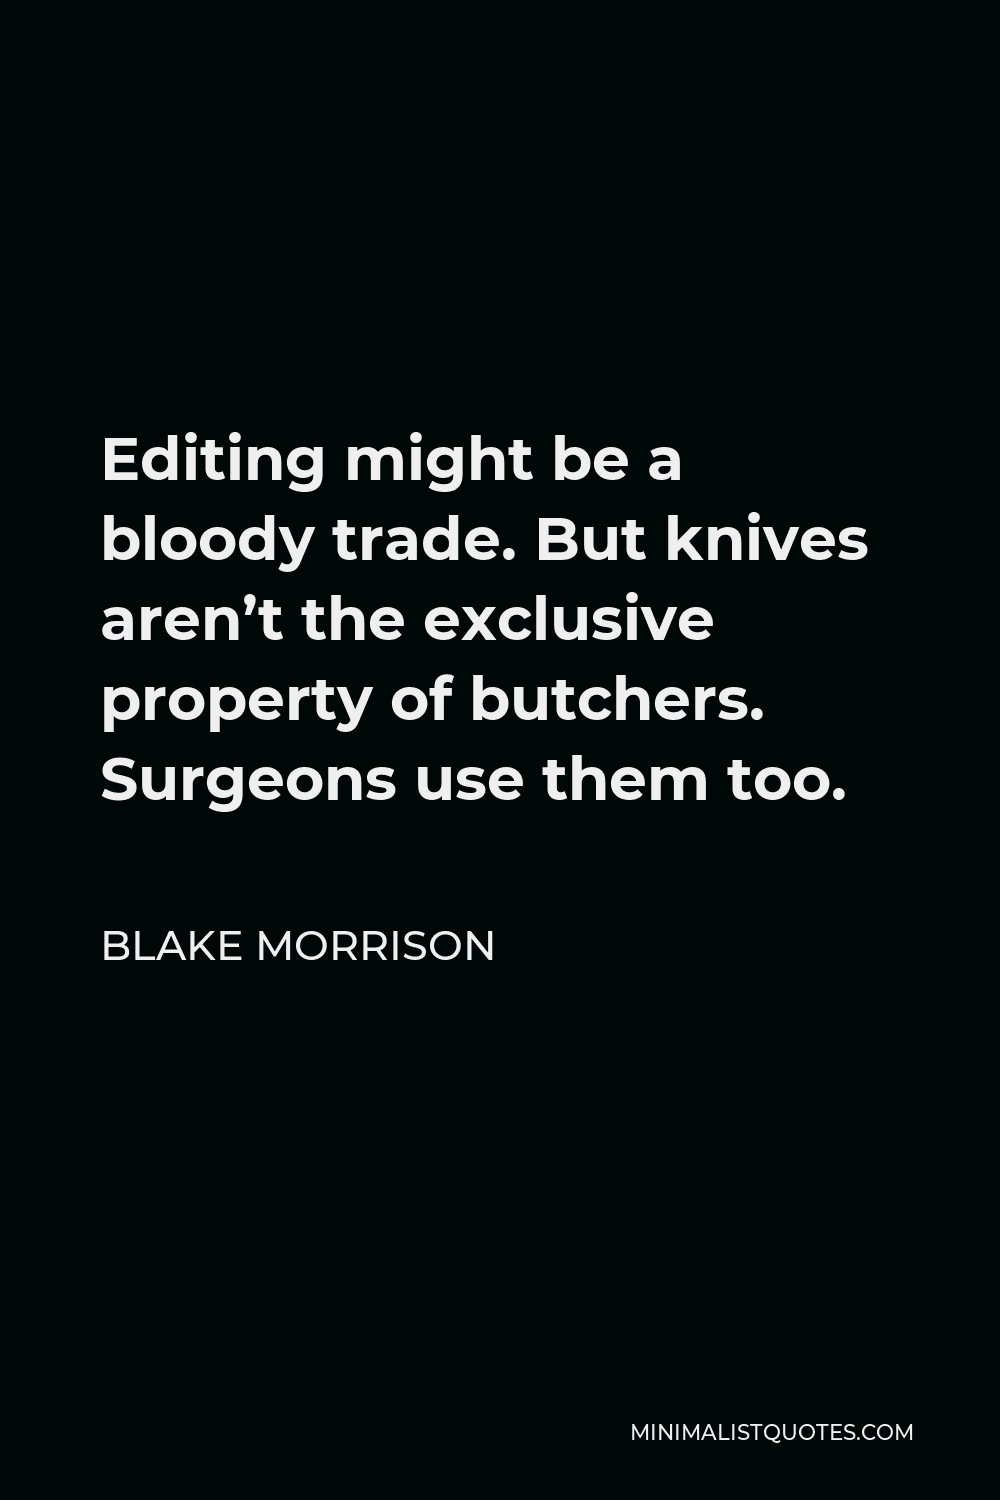 Blake Morrison Quote - Editing might be a bloody trade. But knives aren’t the exclusive property of butchers. Surgeons use them too.